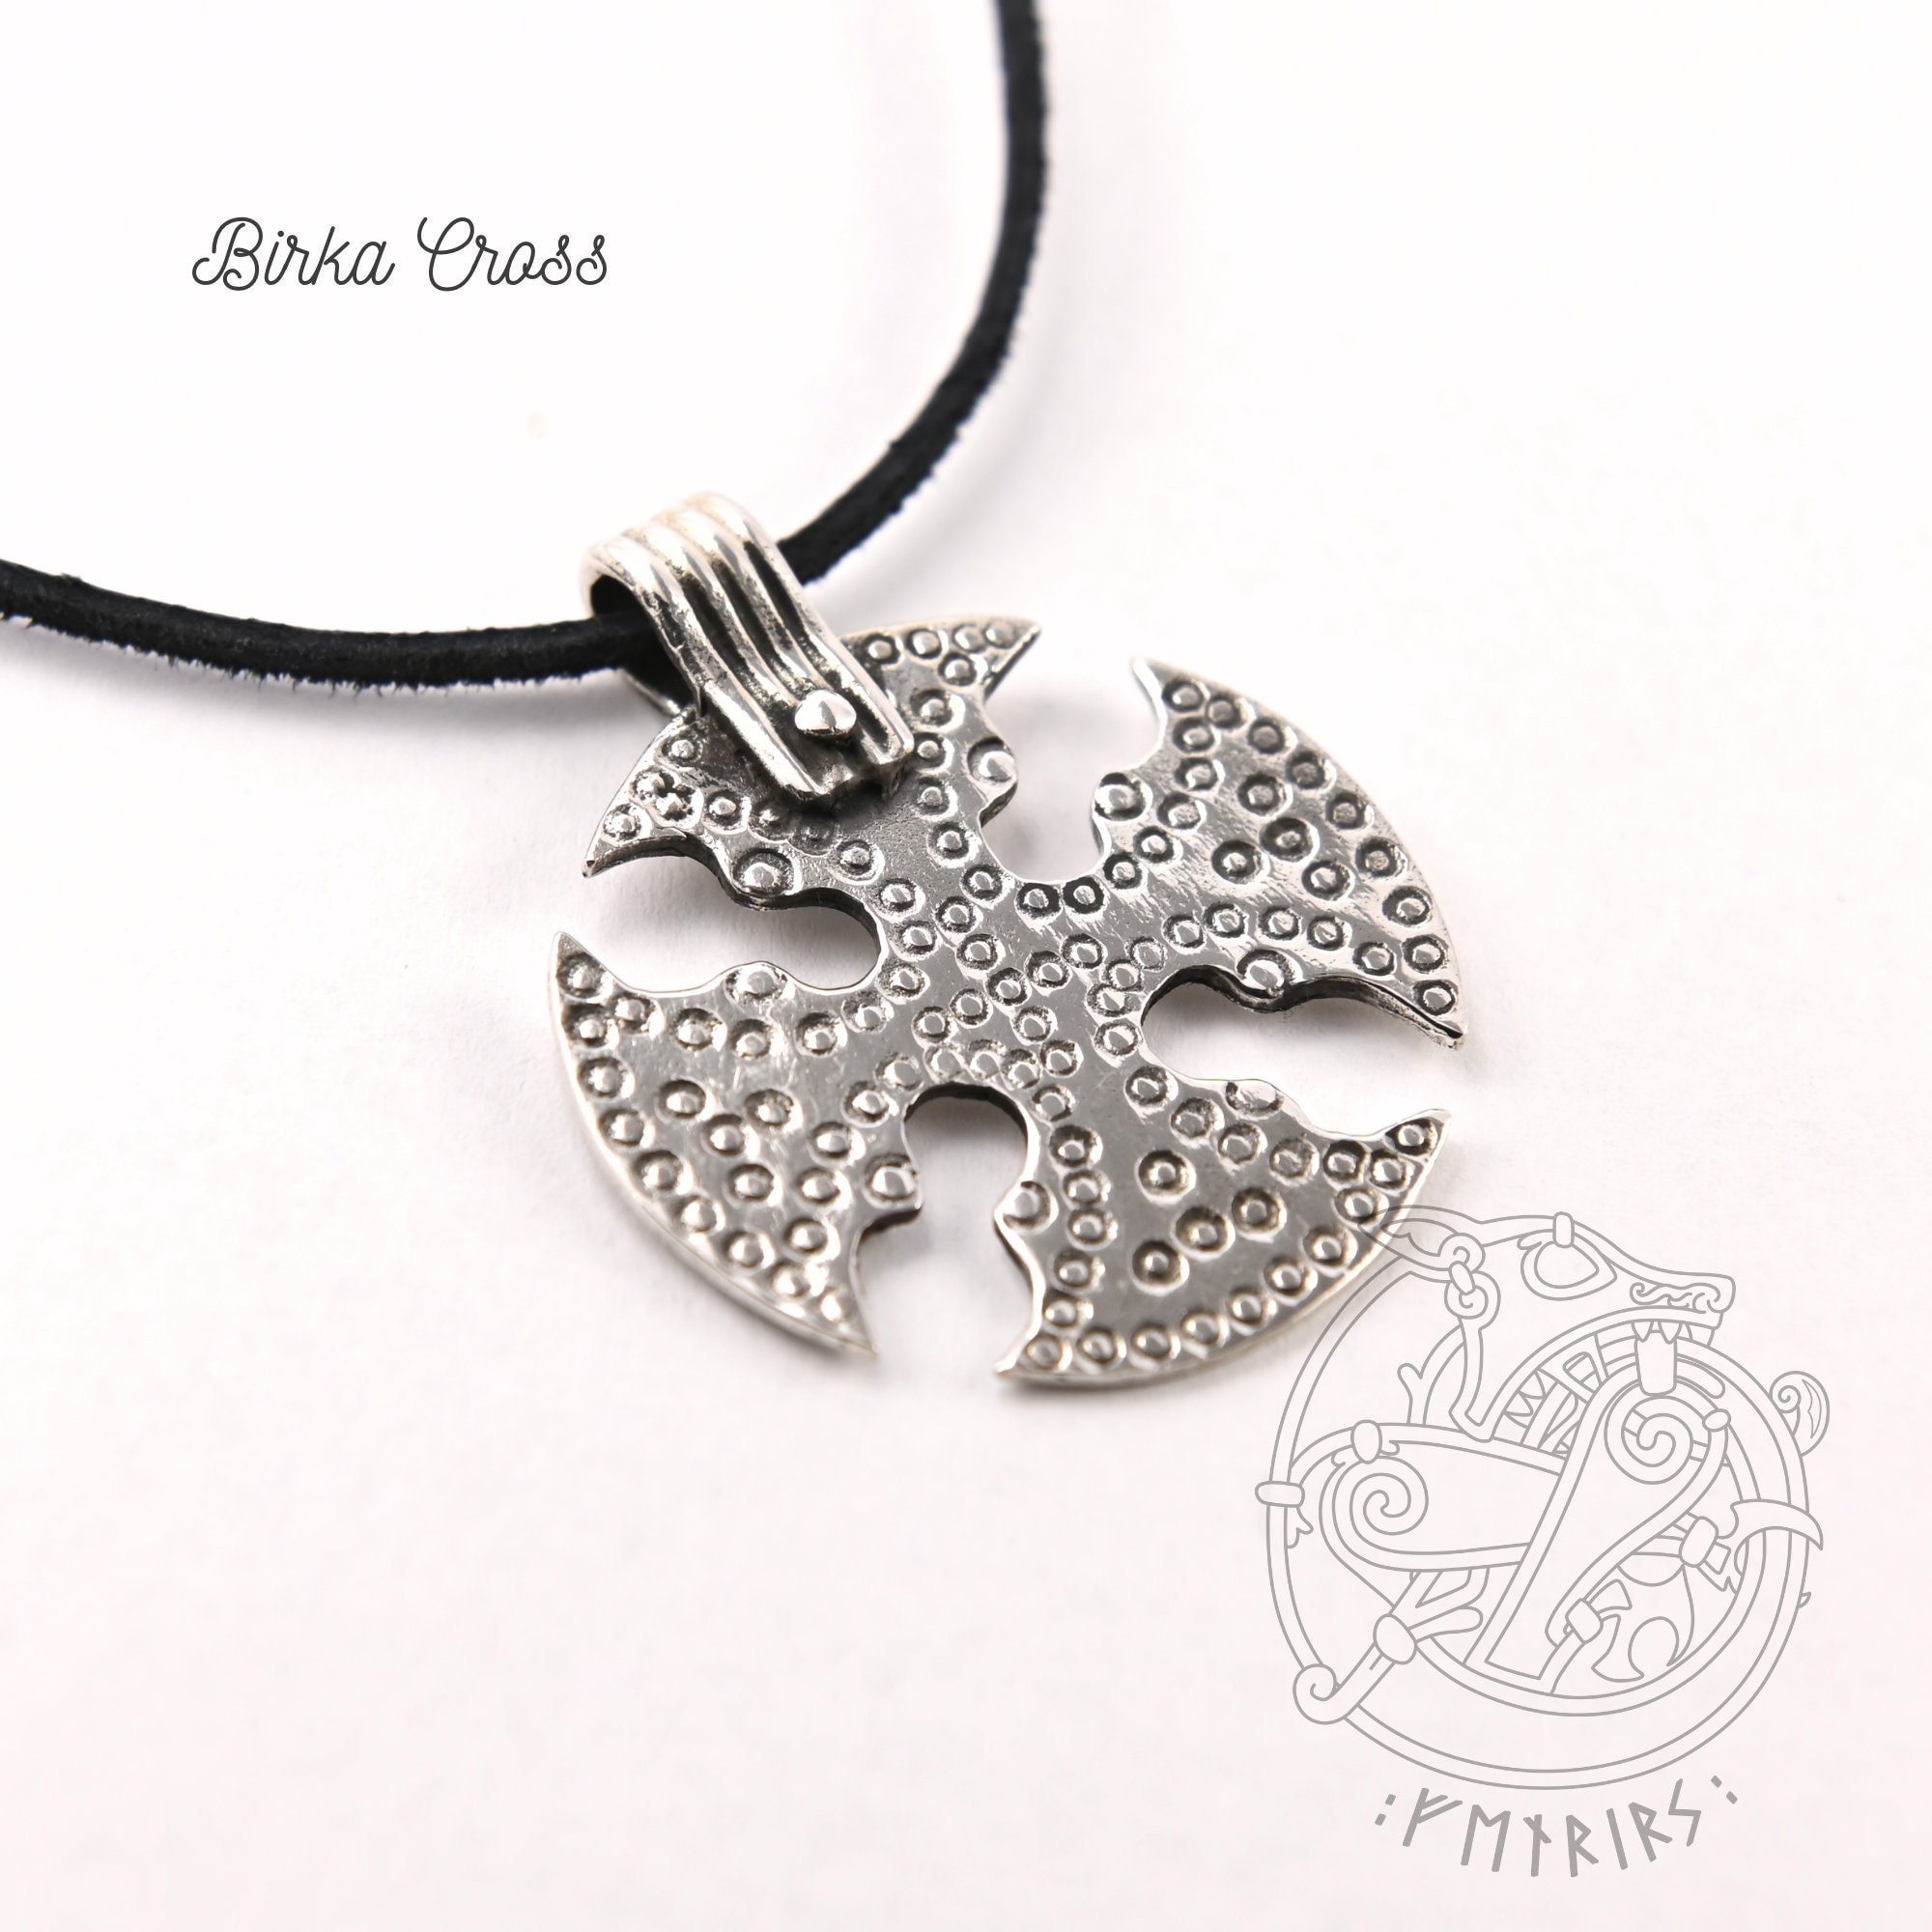 Thor Hammer Necklace - Iron Cross – Odin's Cave